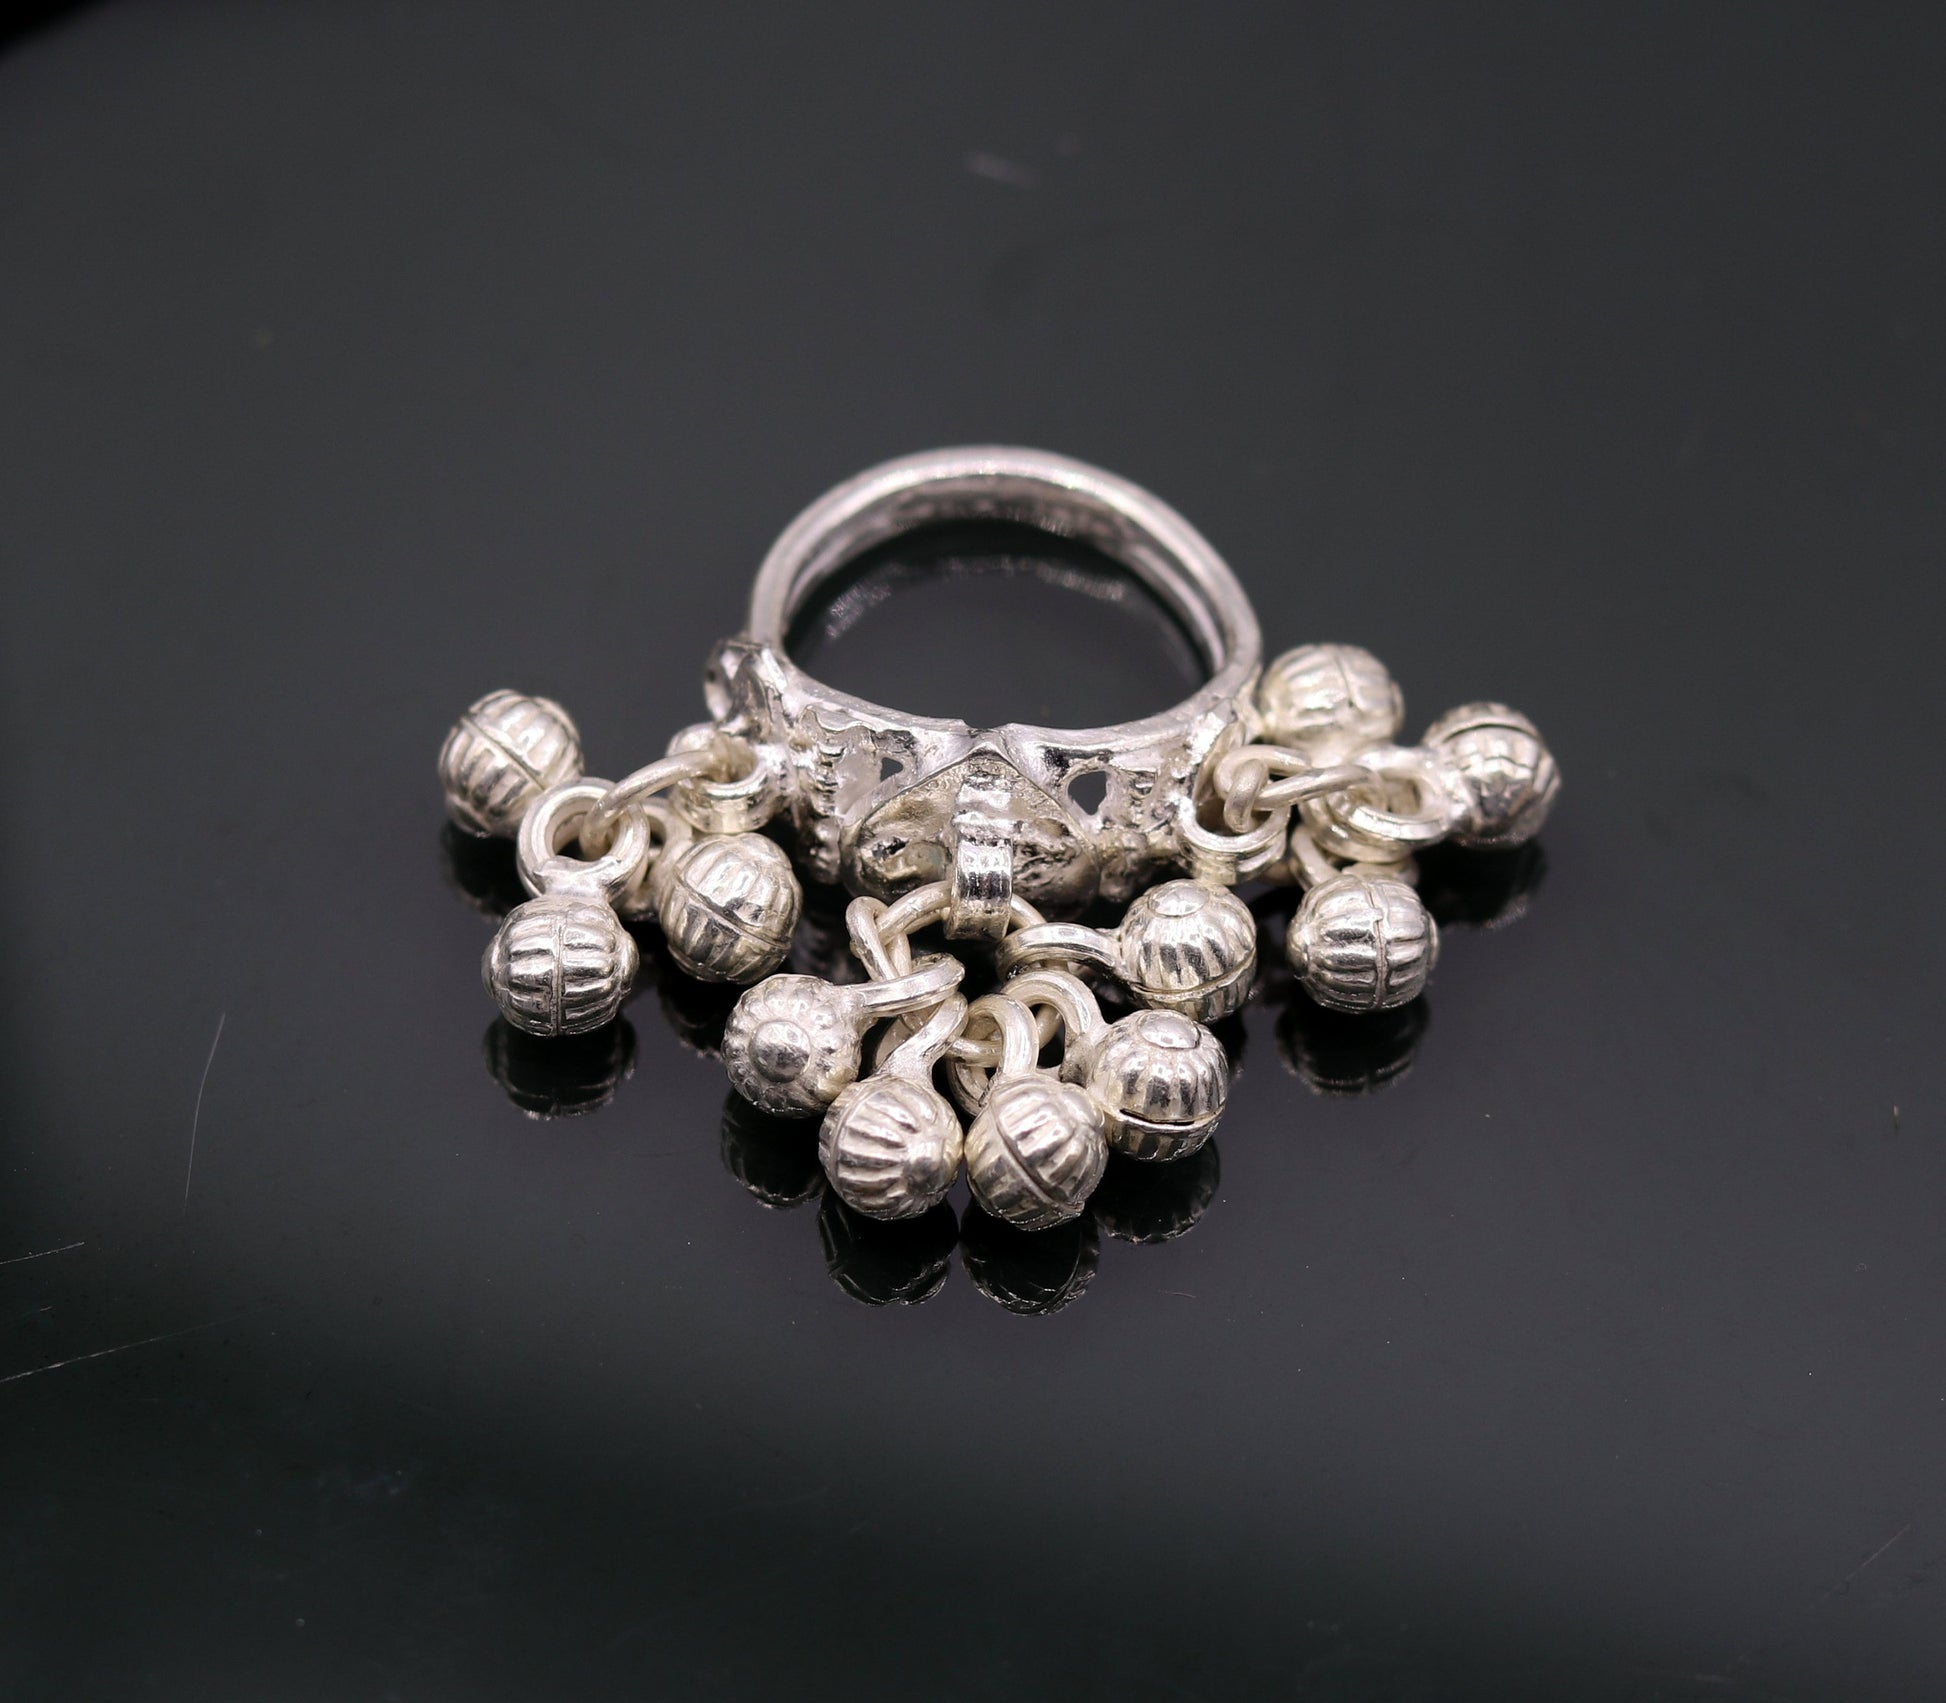 Sterling silver handmade gorgeous charm ring with fabulous noisy bells, excellent belly dance tribal antique jewelry india sr208 - TRIBAL ORNAMENTS